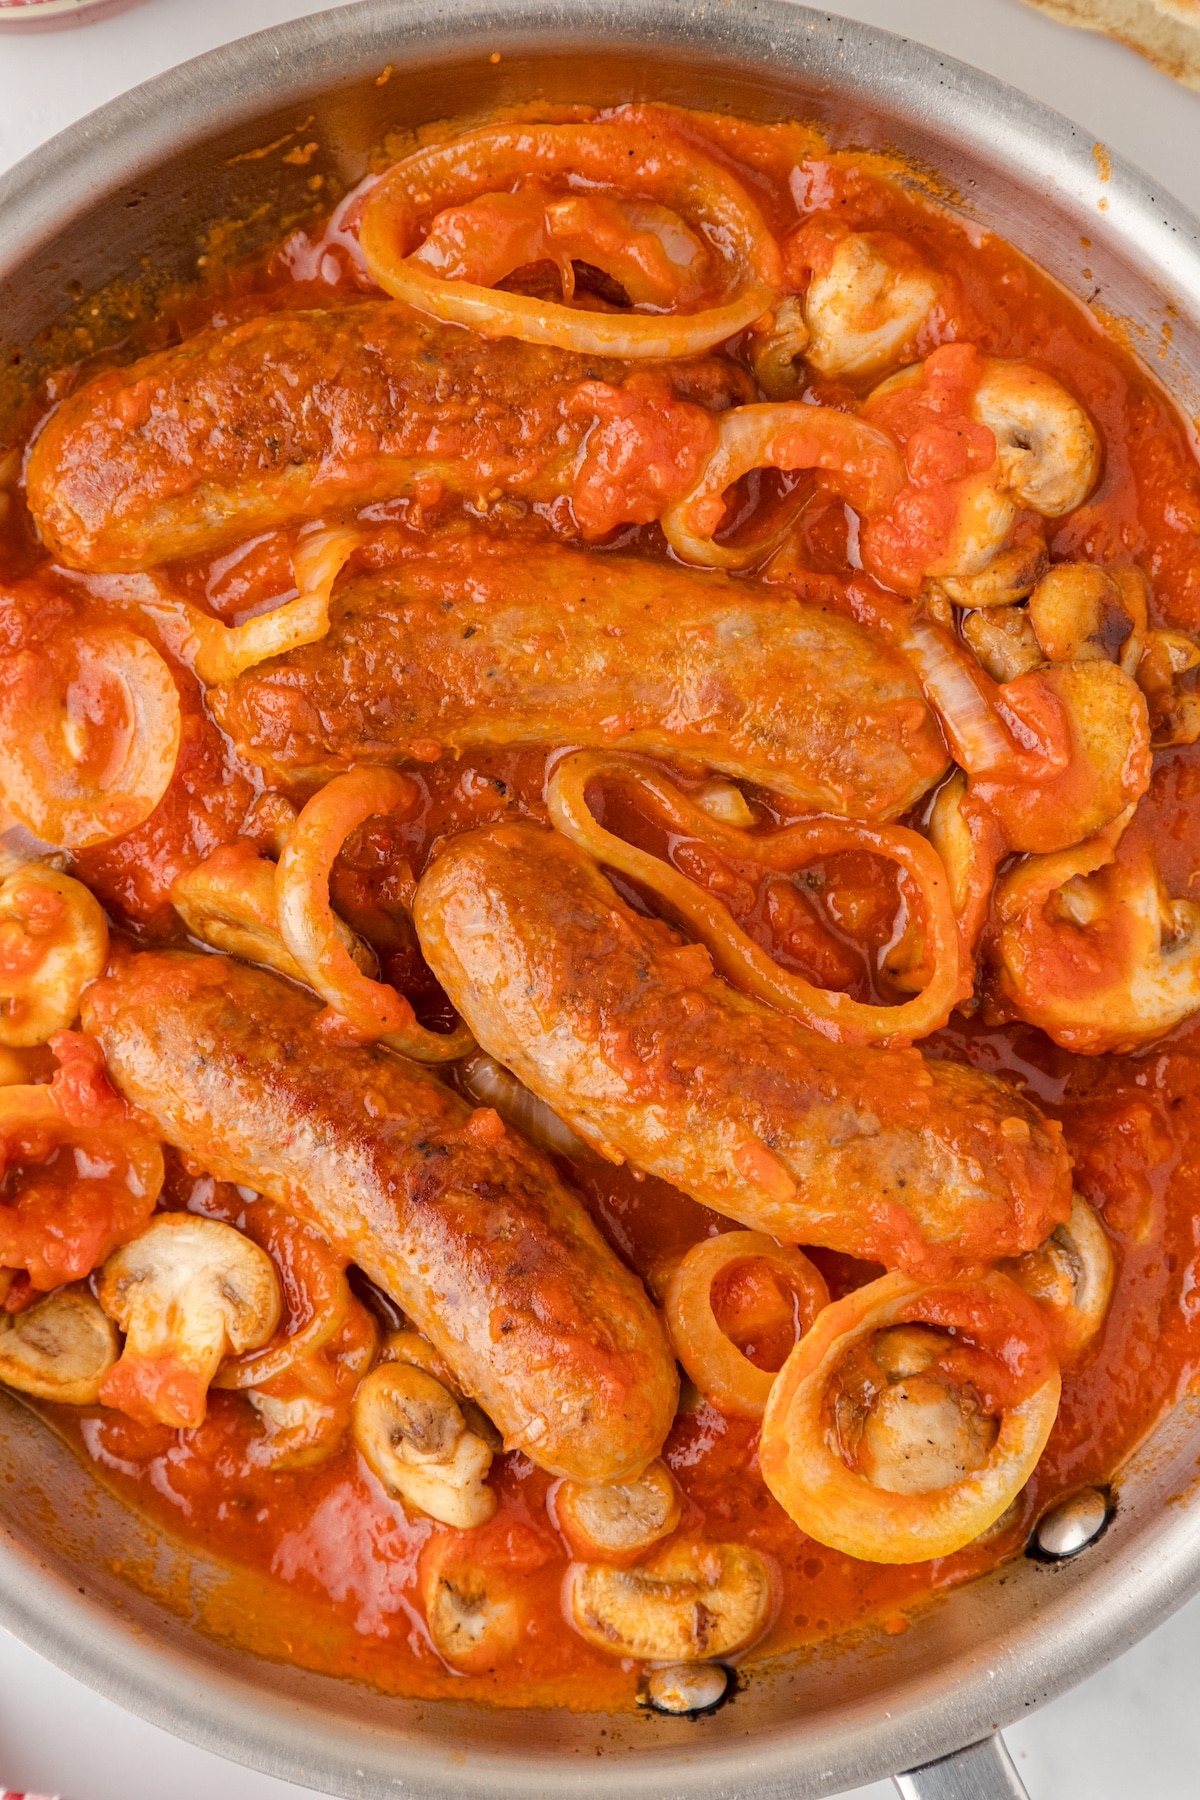 Italian sausages in a skillet with onions, mushrooms, and spaghetti sauce